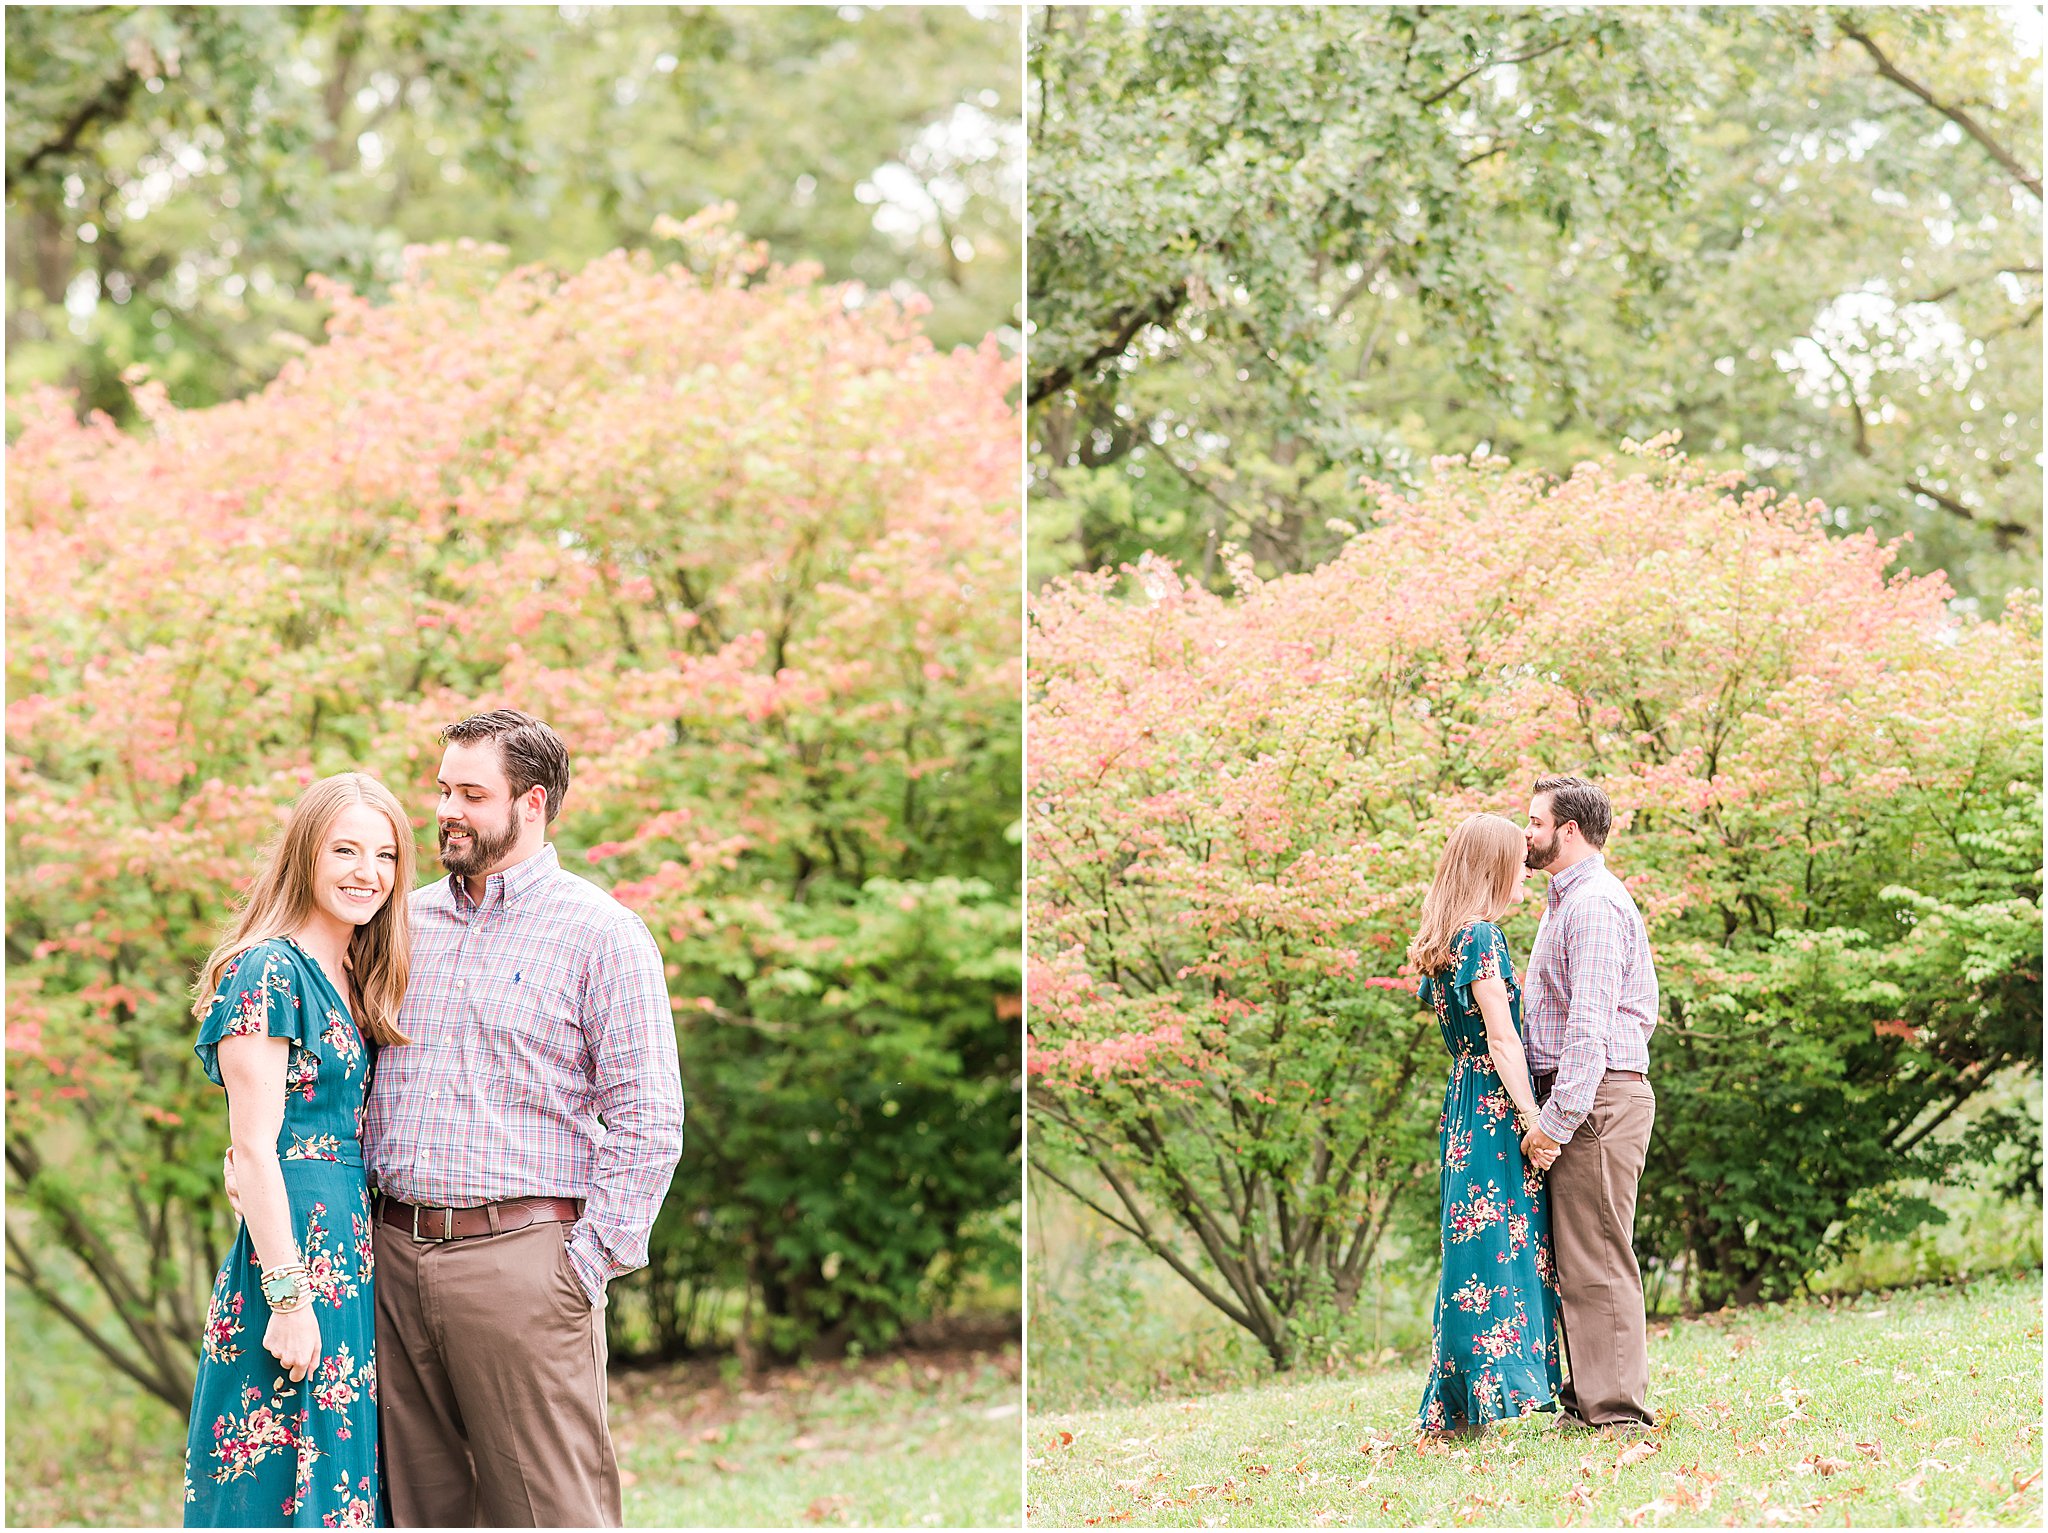 Groom kissing bride on forehead during Coxhall Gardens engagement session